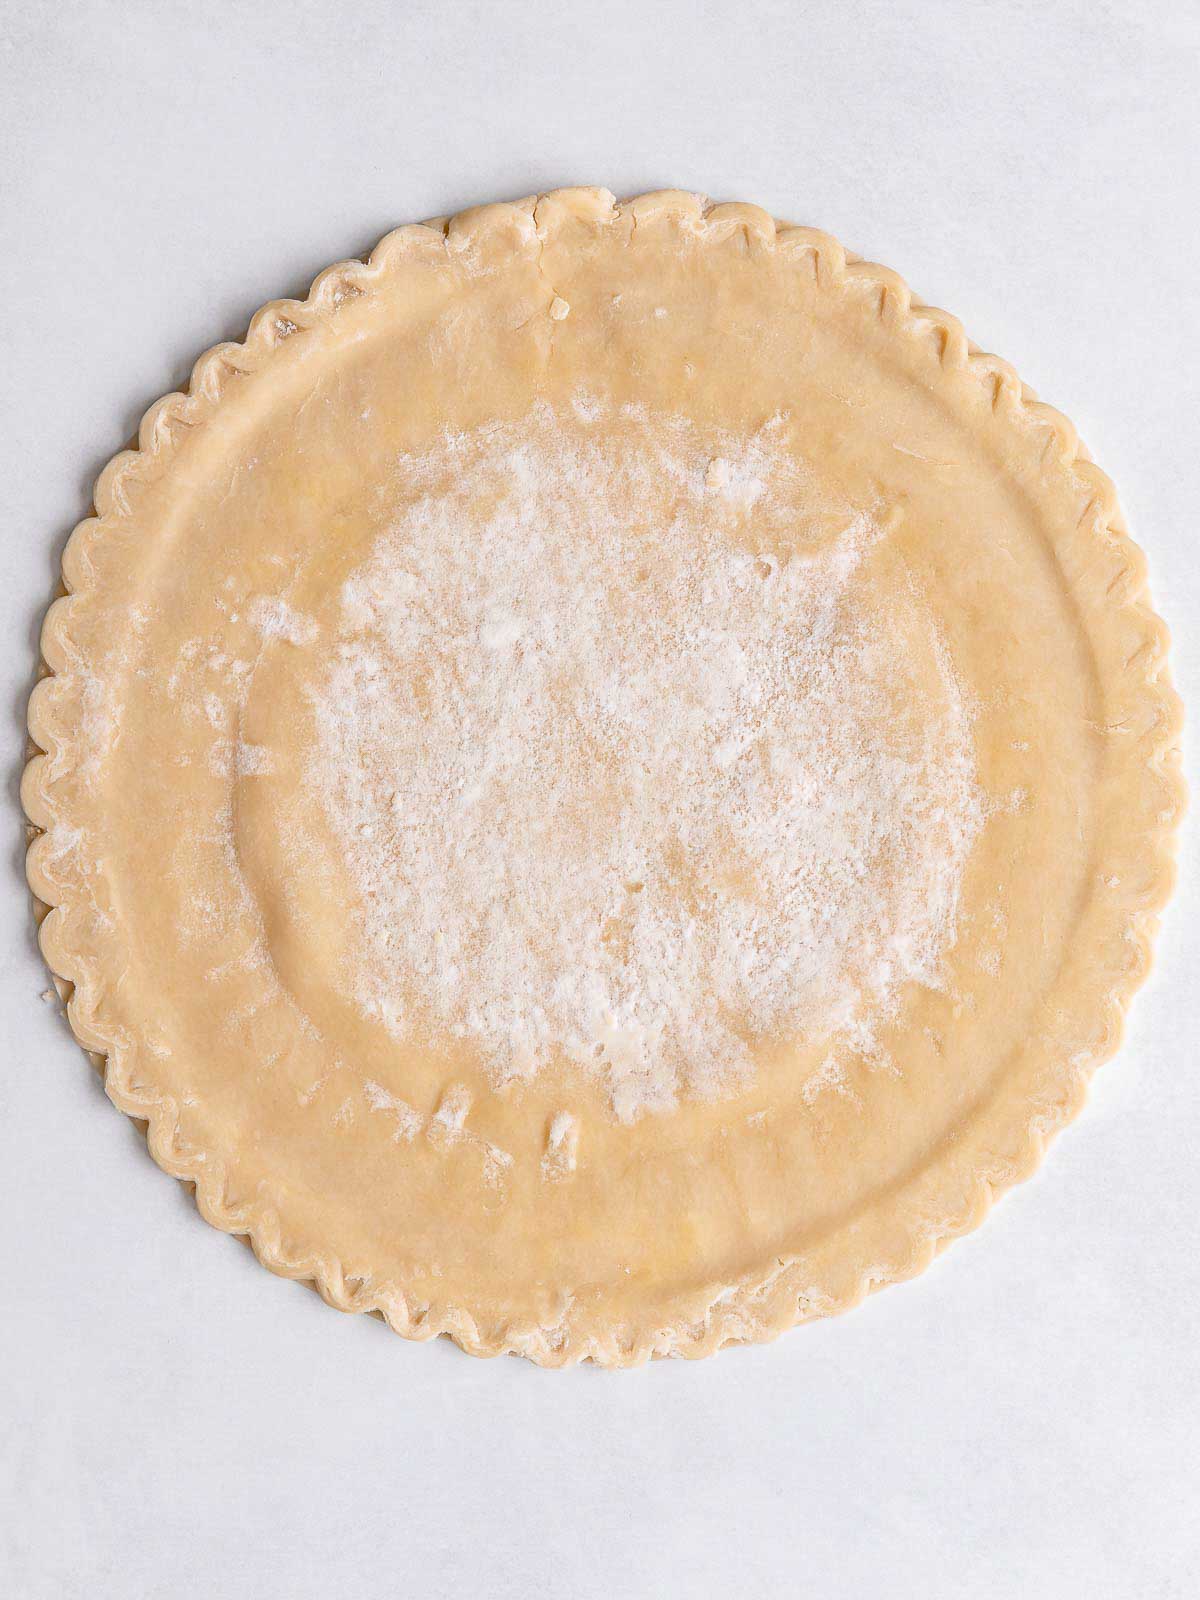 uncooked pie crust laid out